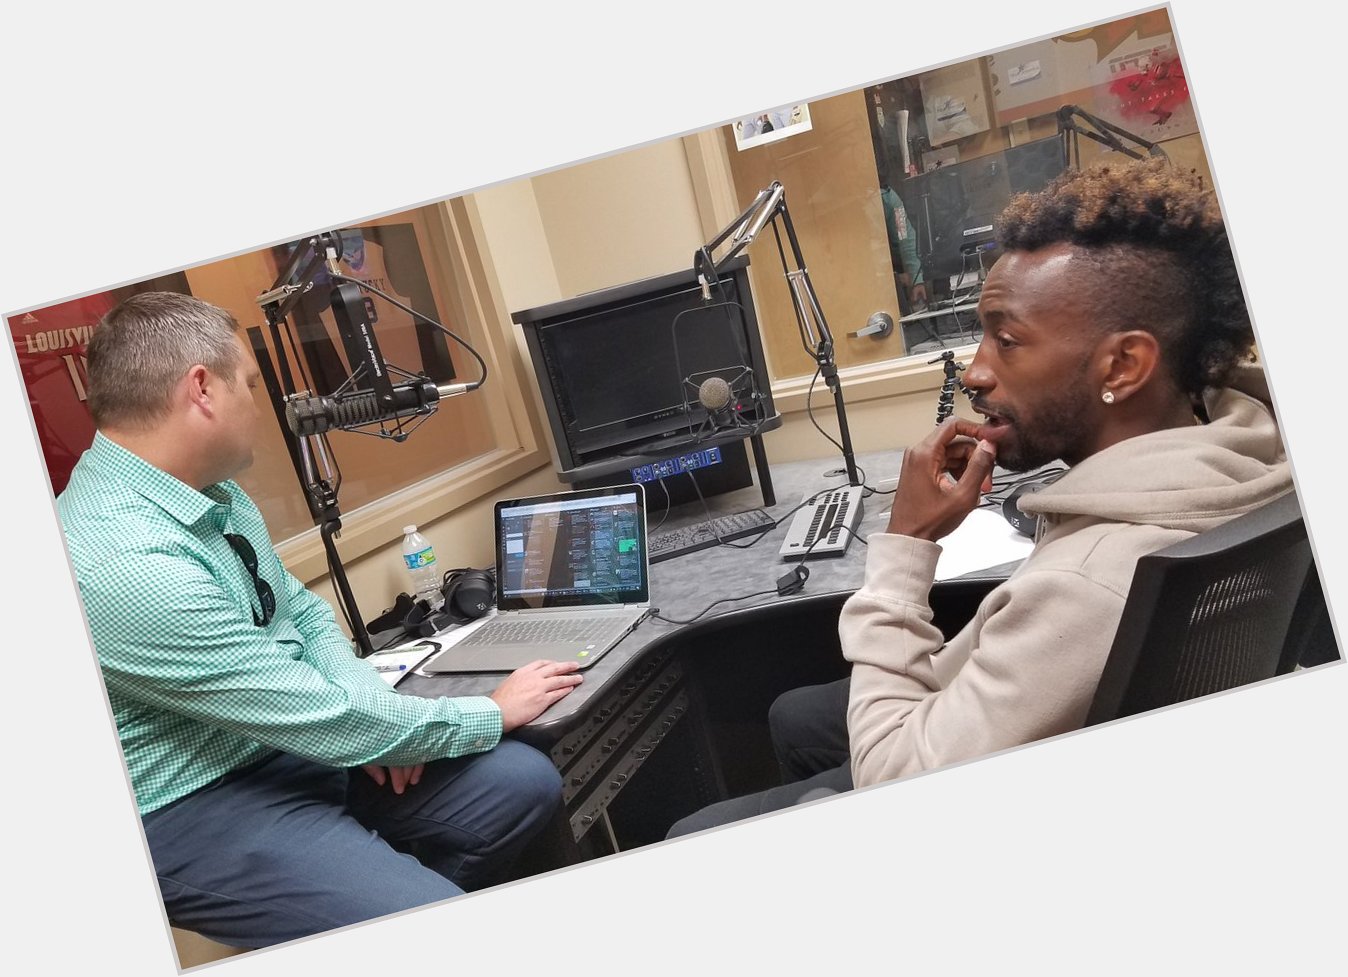 Happy Birthday to Russ Smith who is taking some time with Mark Blankenbaker at ESPN 93.9 The Ville 